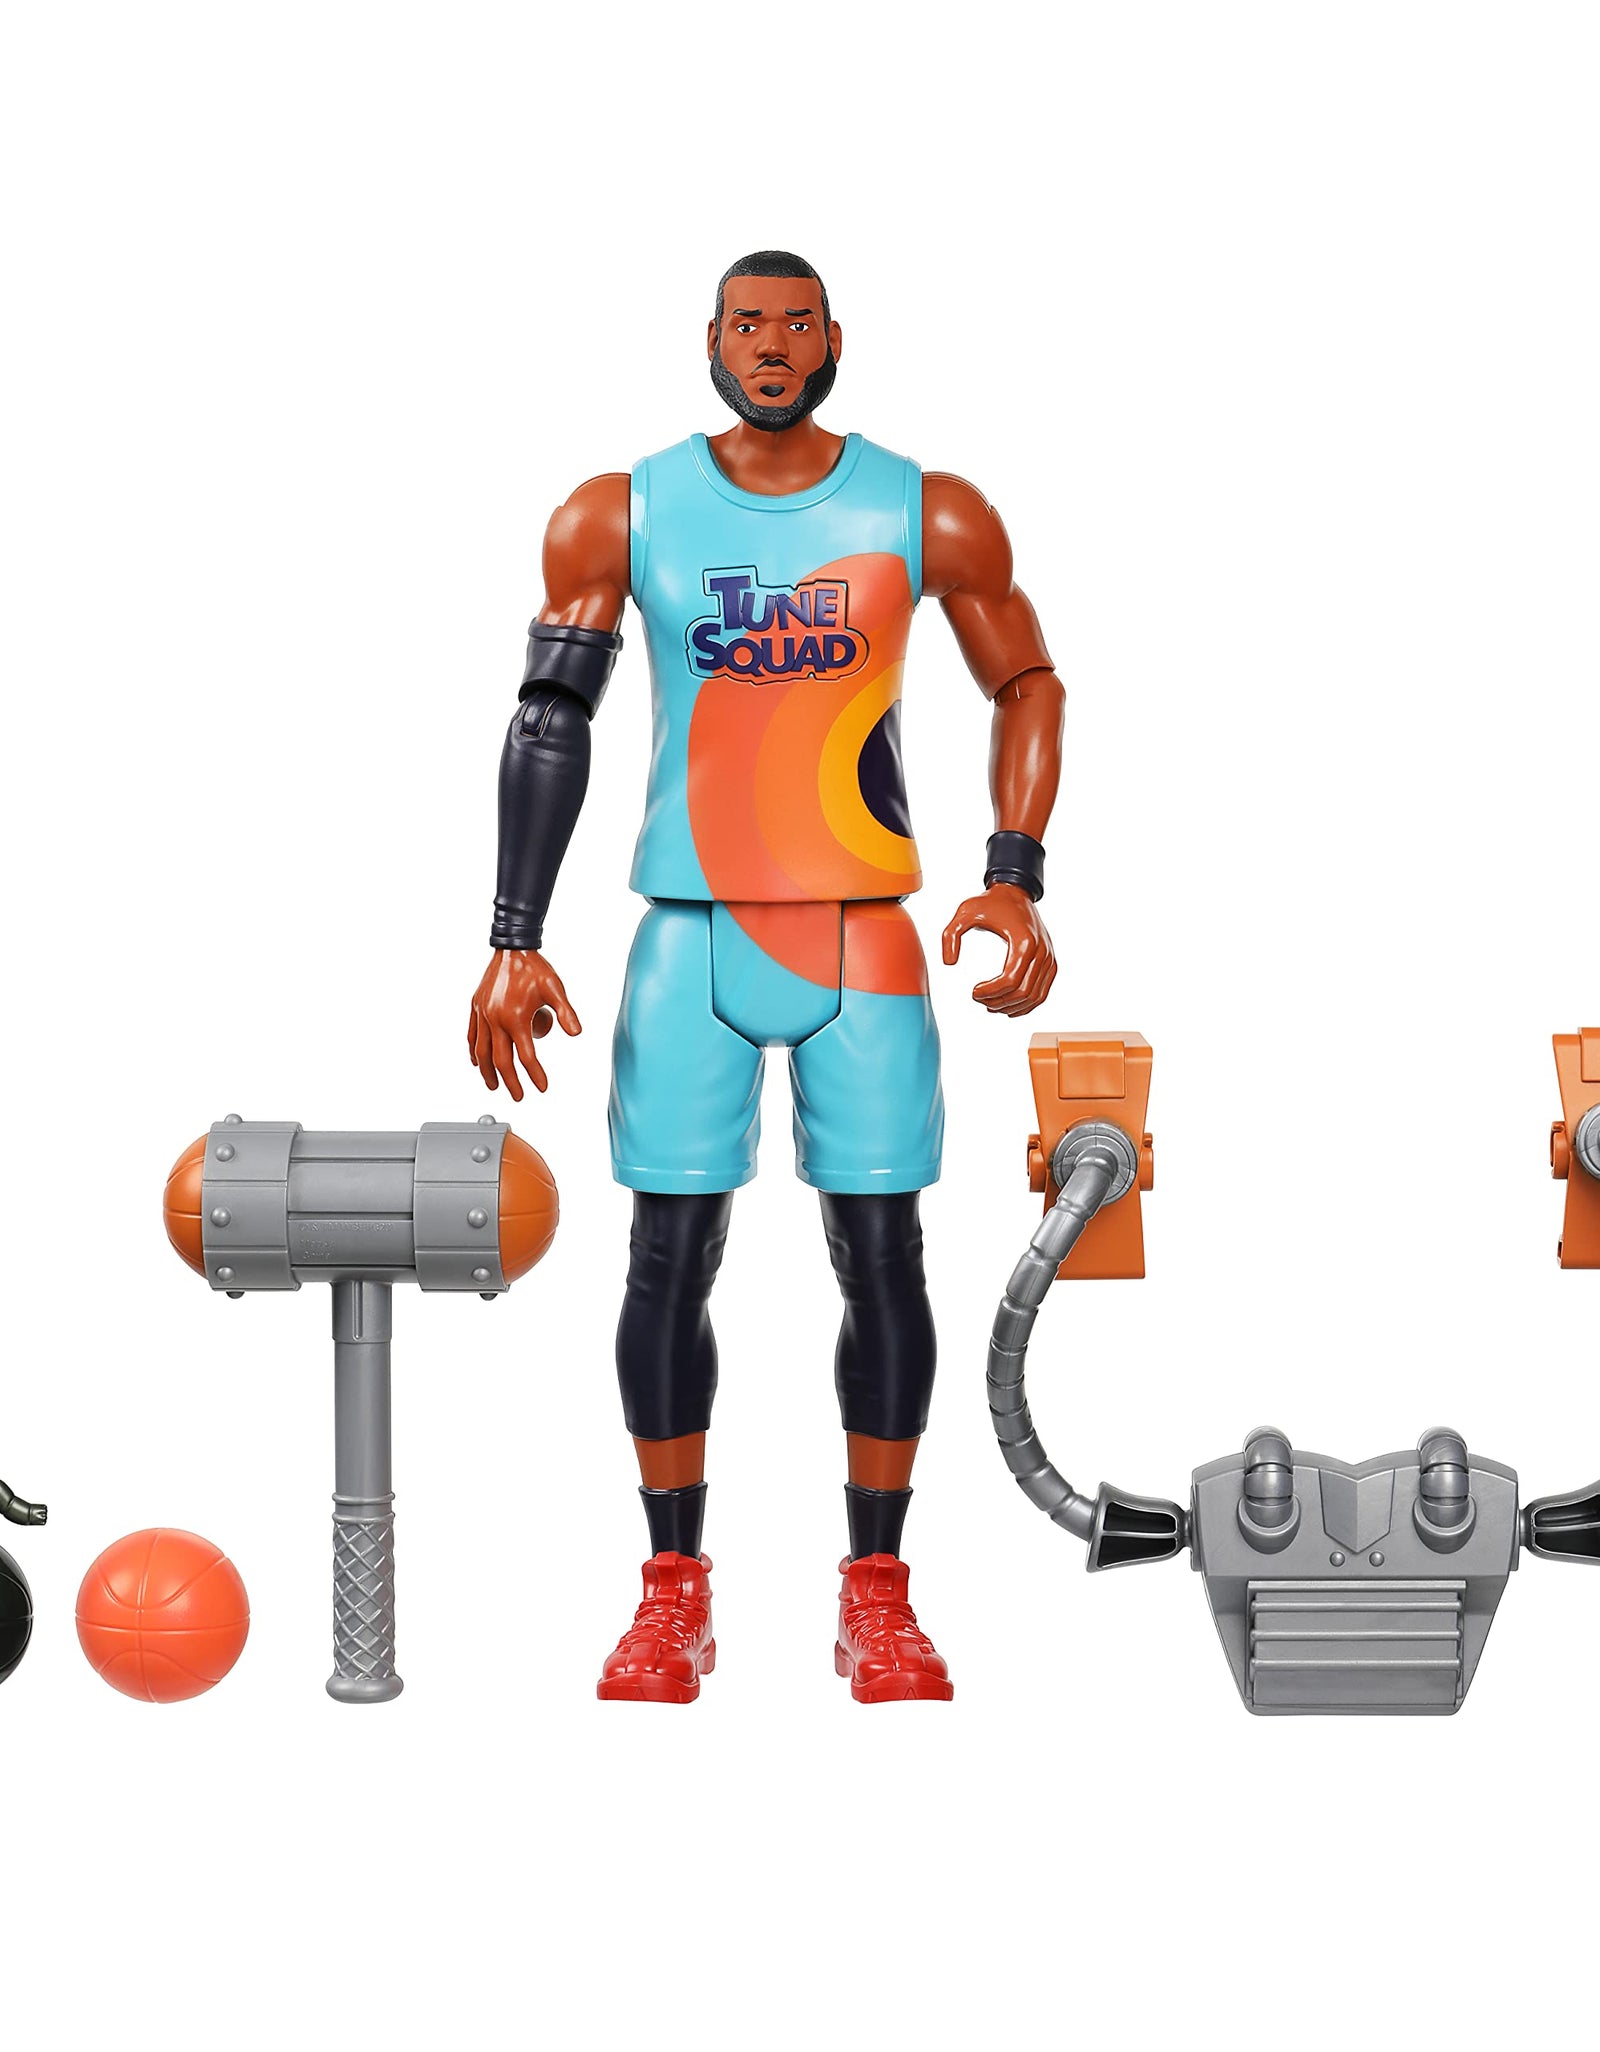 Moose Toys Space Jam: A New Legacy - Lebron James Ultimate Tune Squad 12" Action Figure